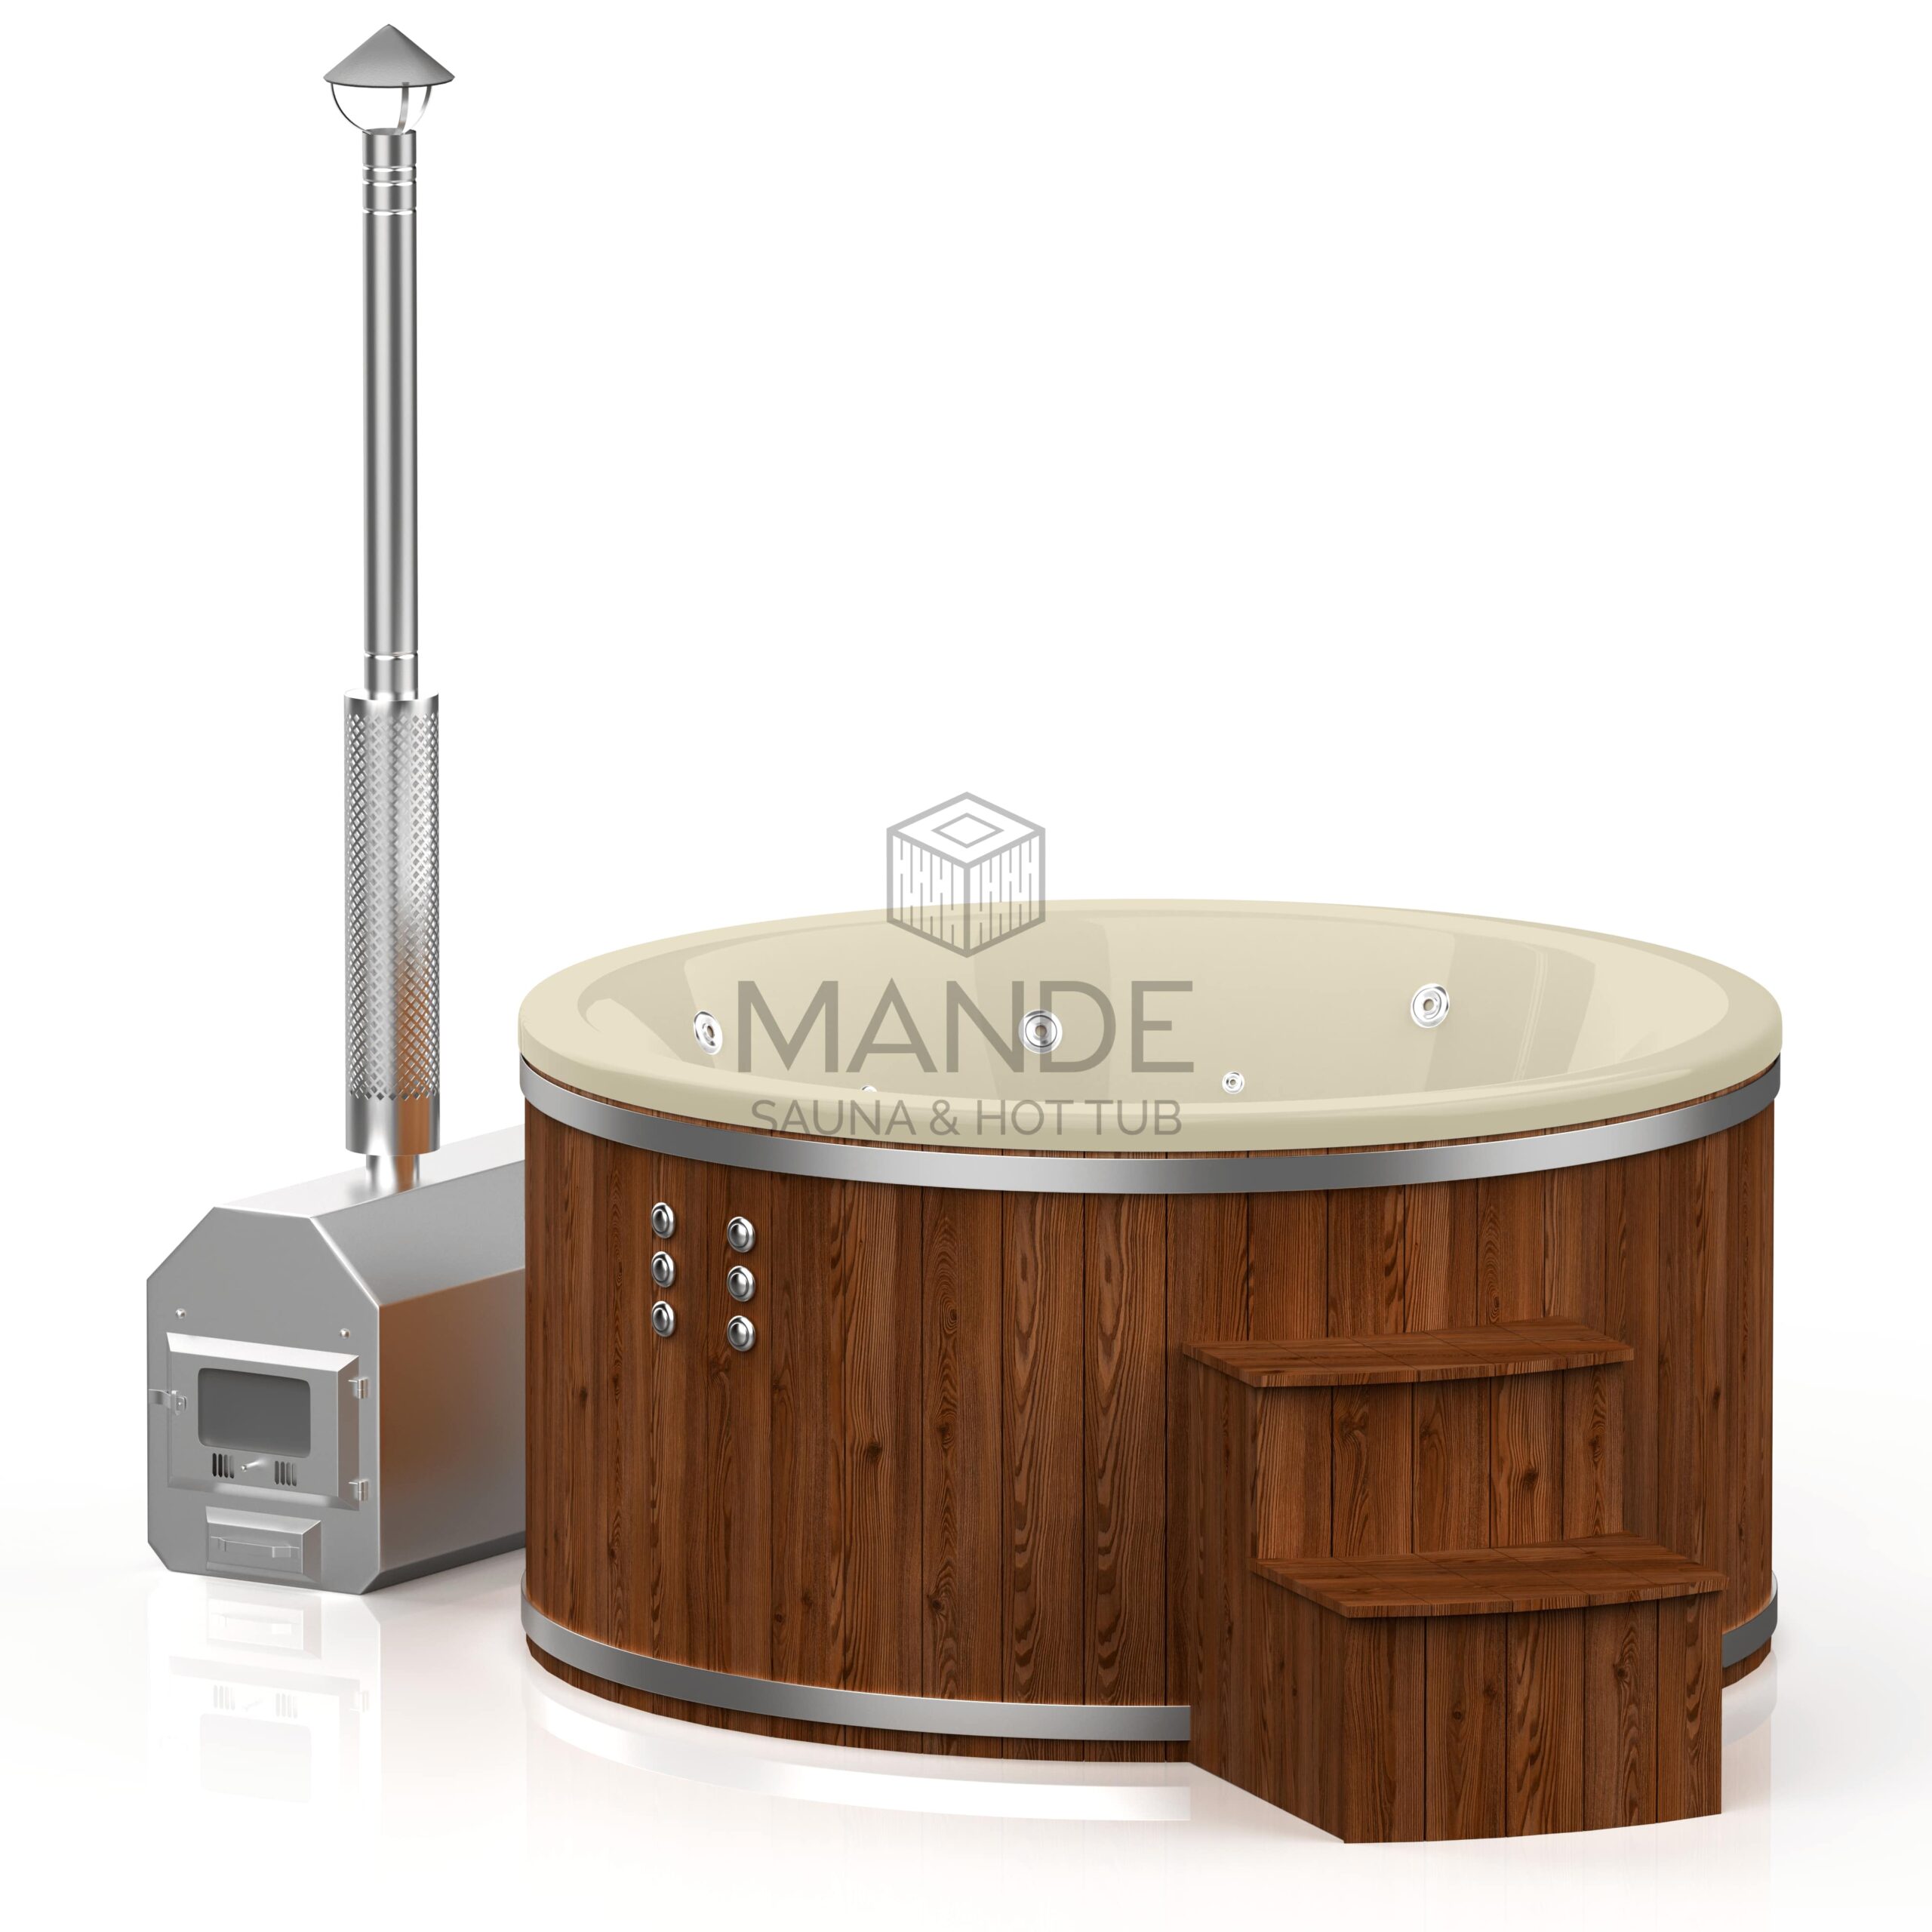 ot tub with external oven 2.0m inside / 2.25m exterior – Spruce wood